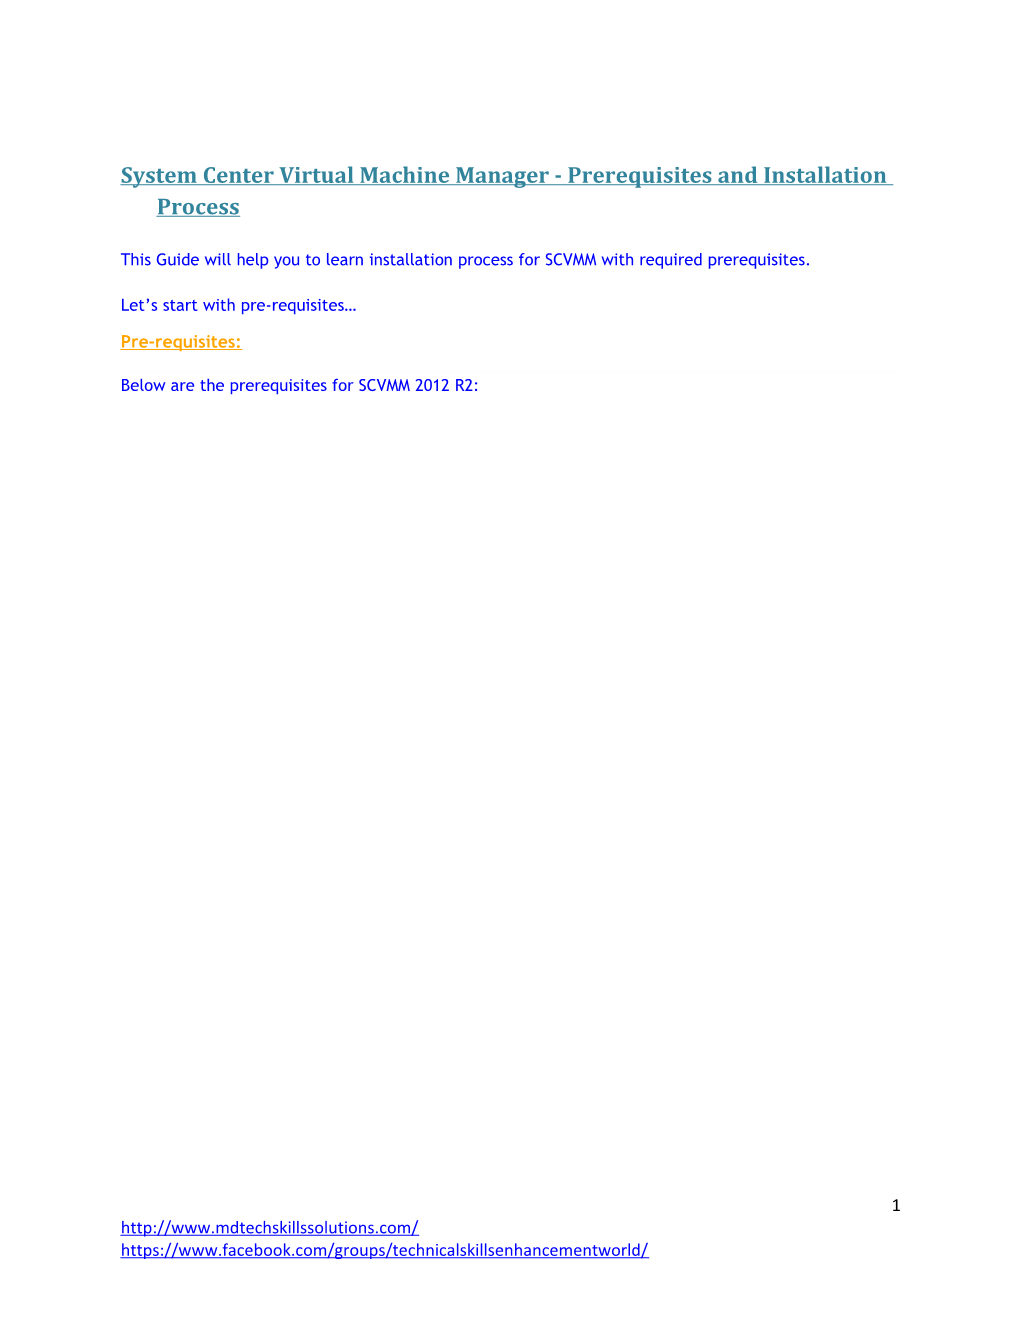 System Center Virtual Machine Manager - Prerequisites and Installation Process